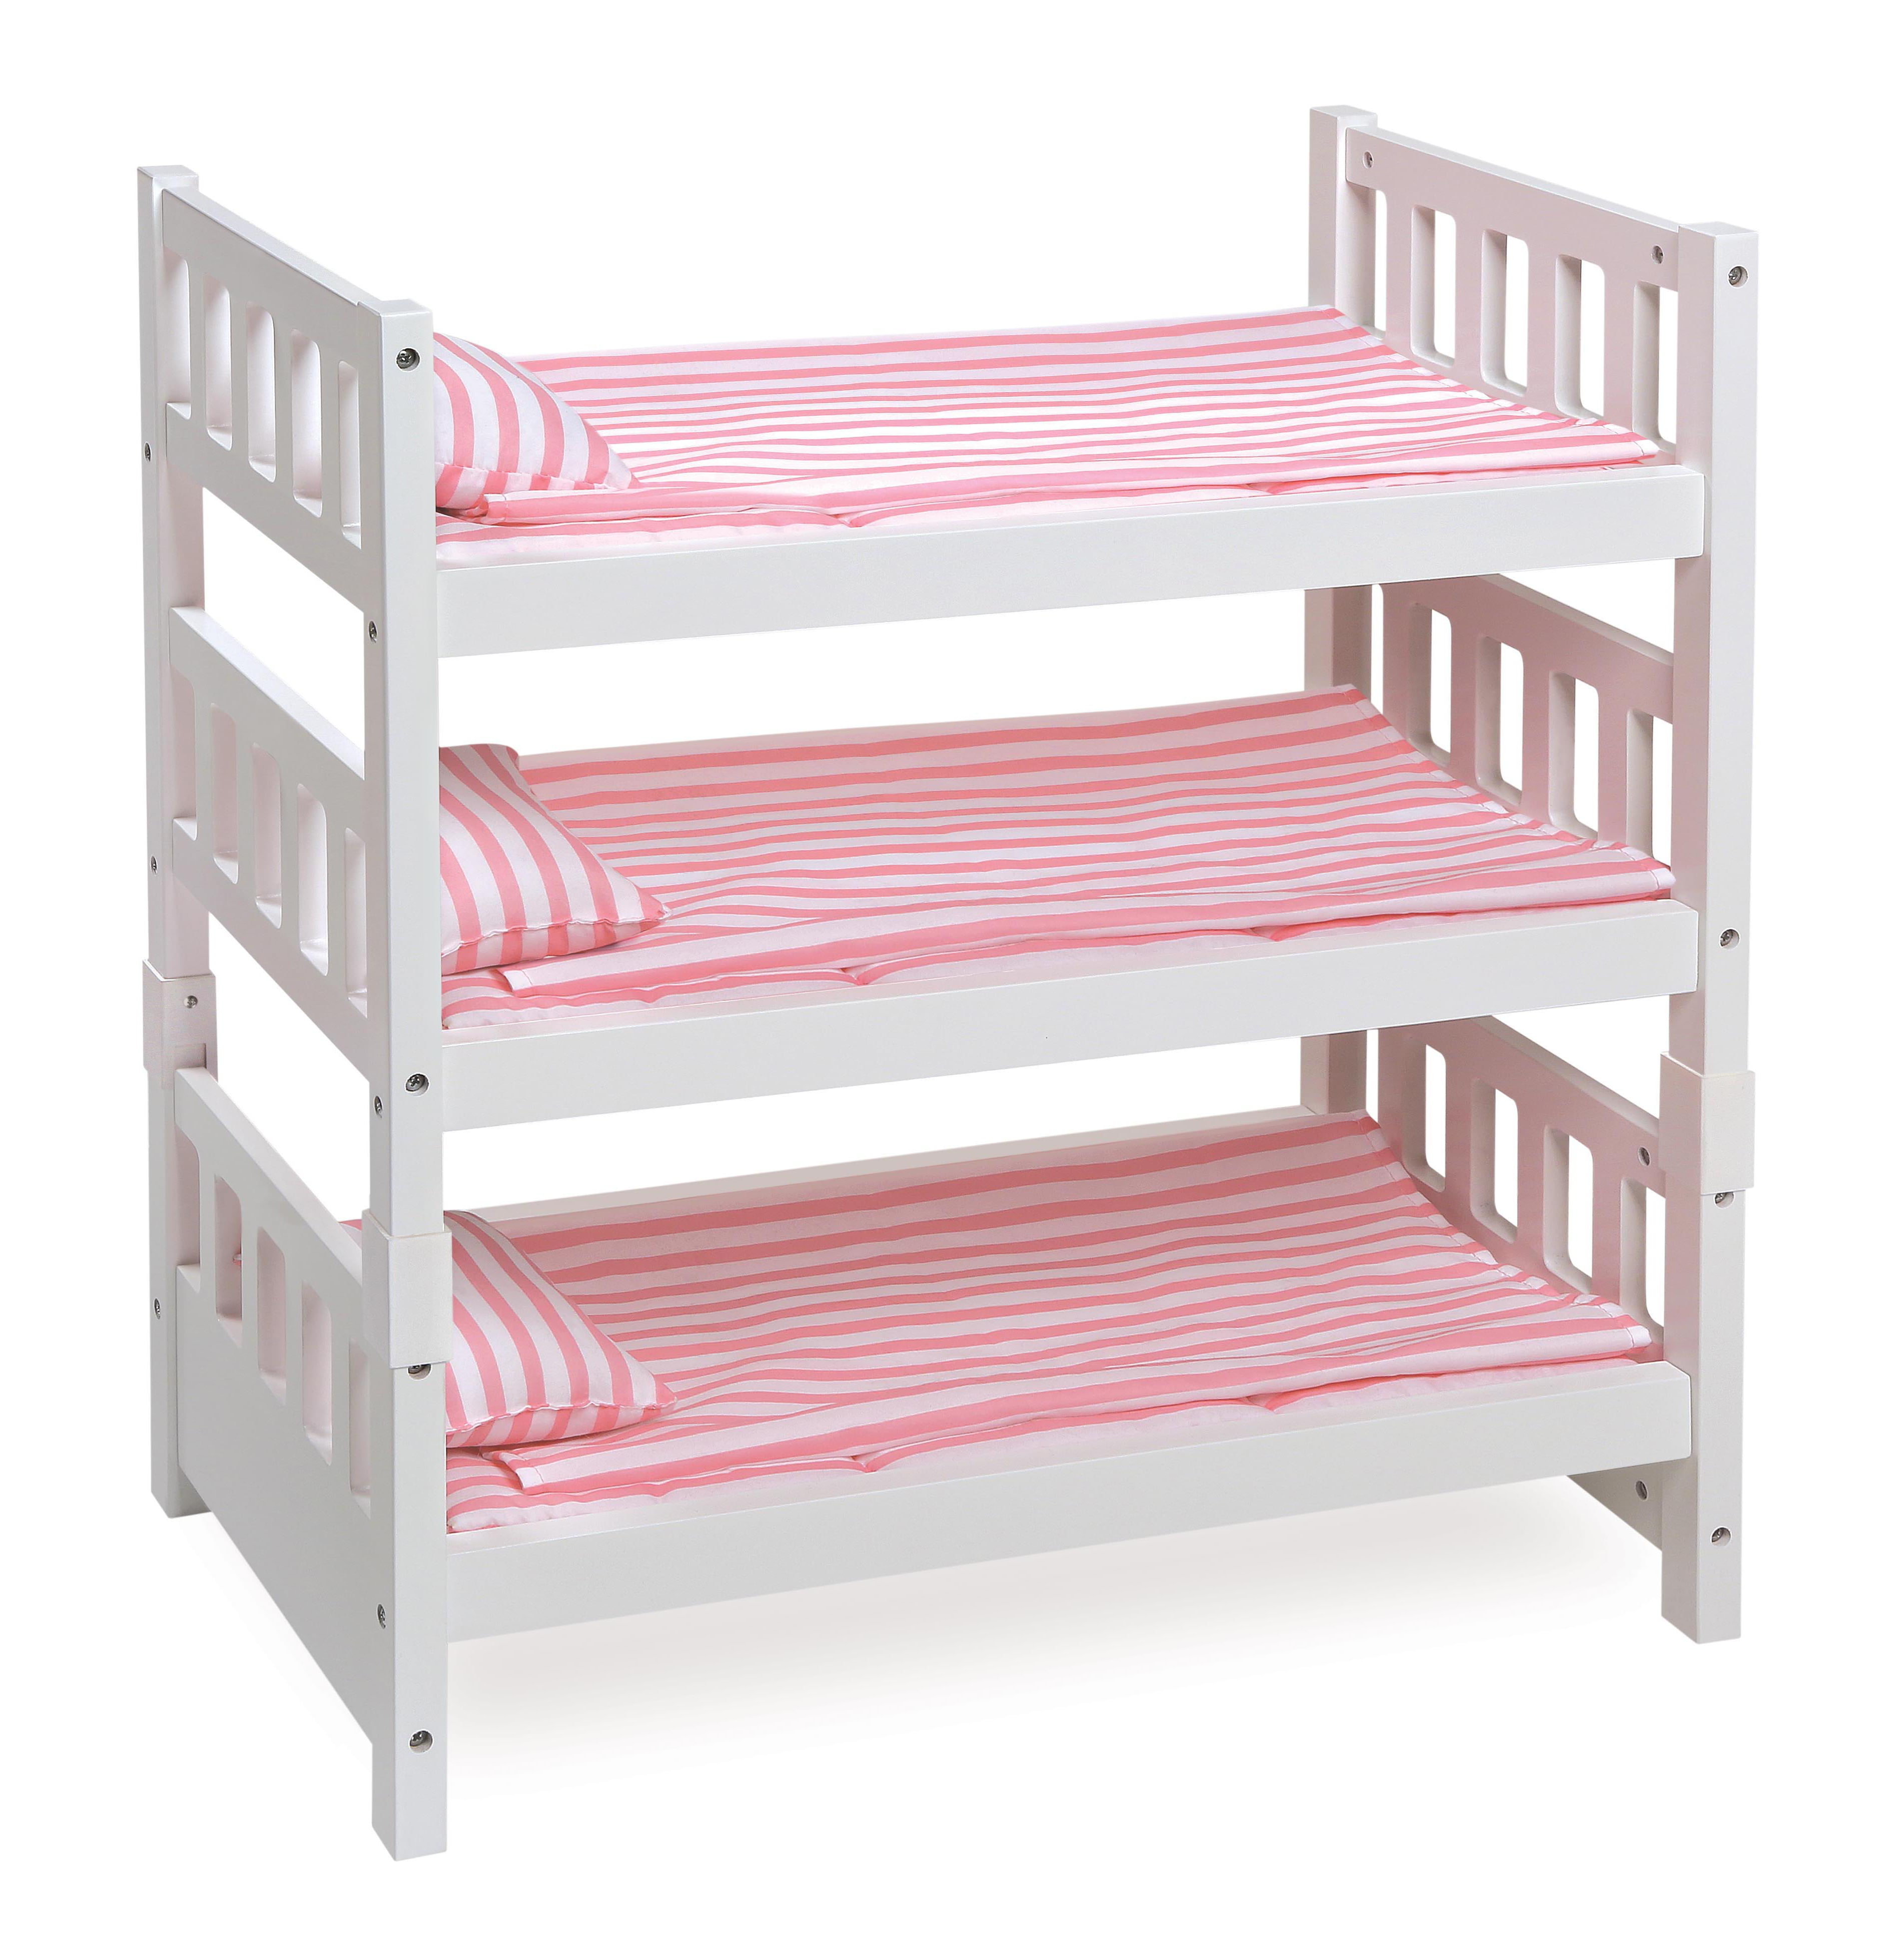 Convertible Doll Bunk Bed, 18 Inch Doll Bunk Bed Bedding